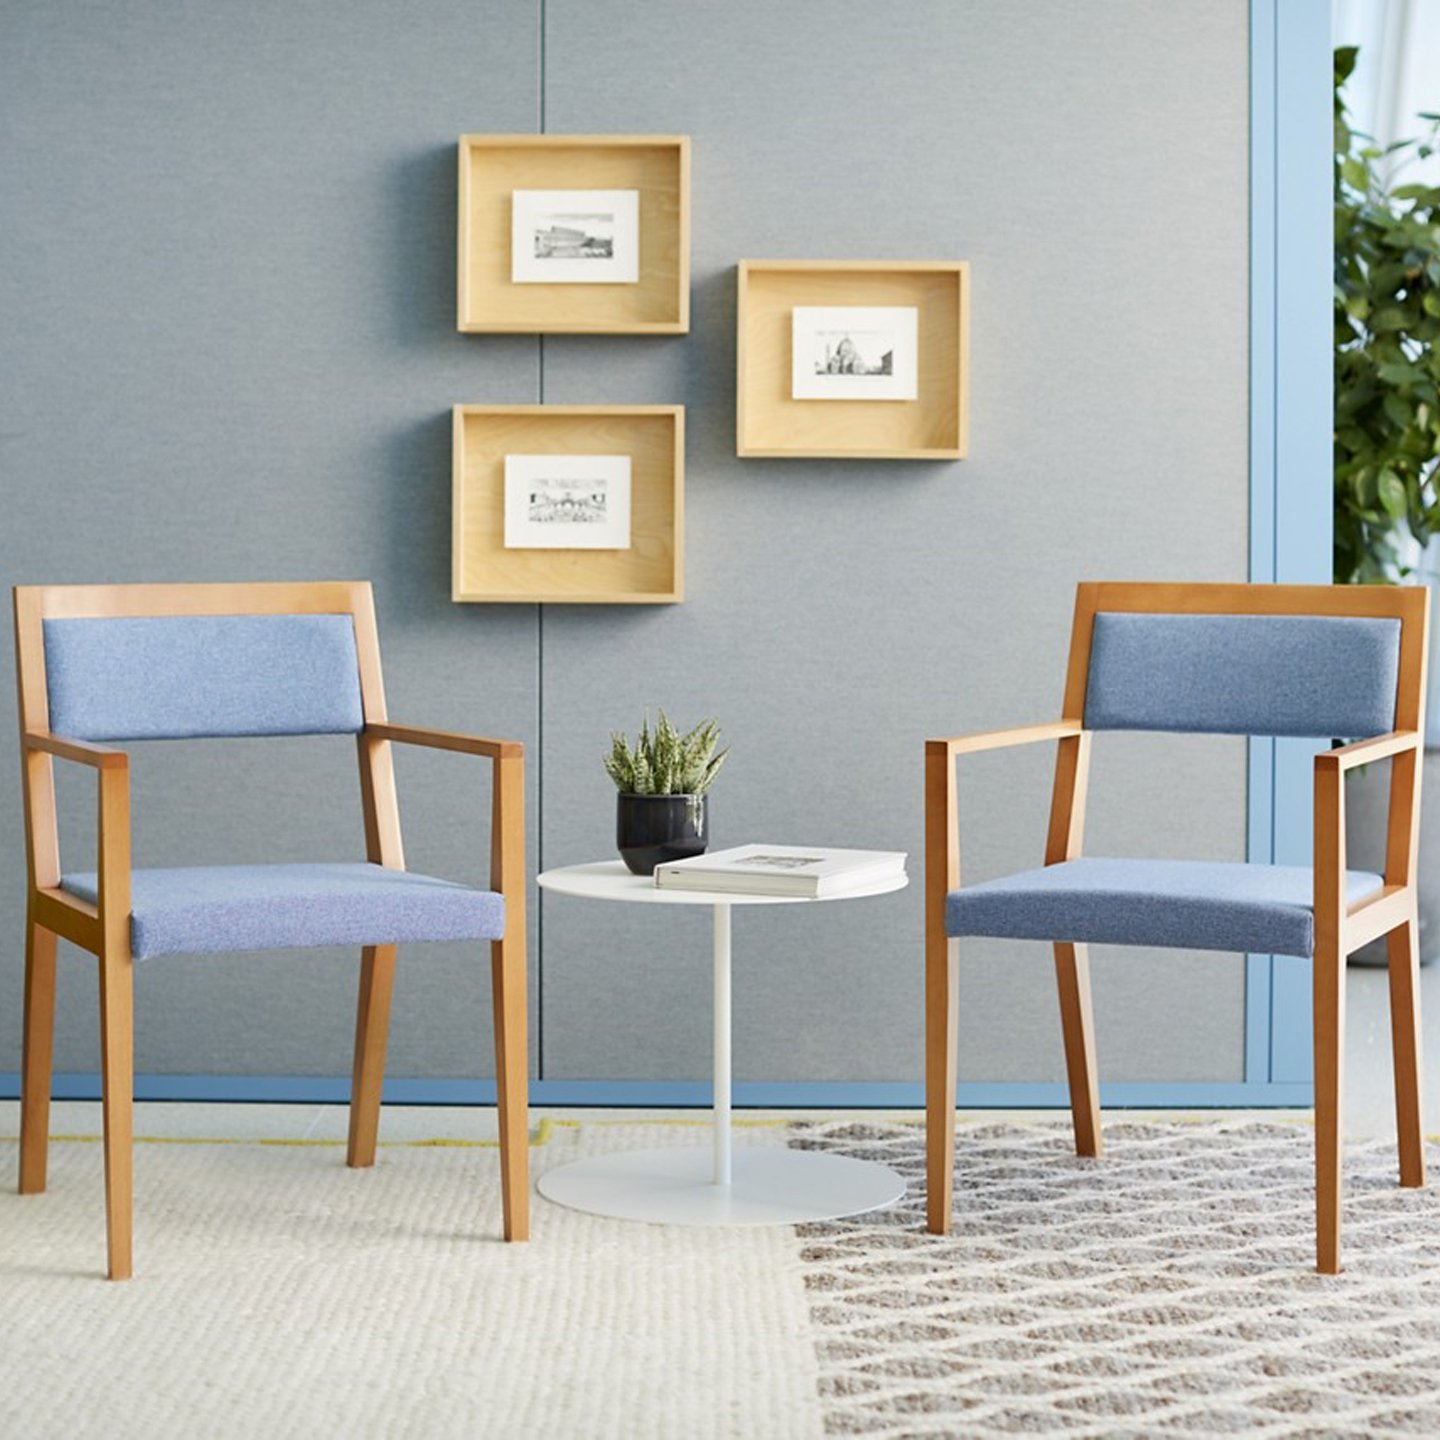 Haworth Candor chairs in blue fabric with wooden structure in a living room